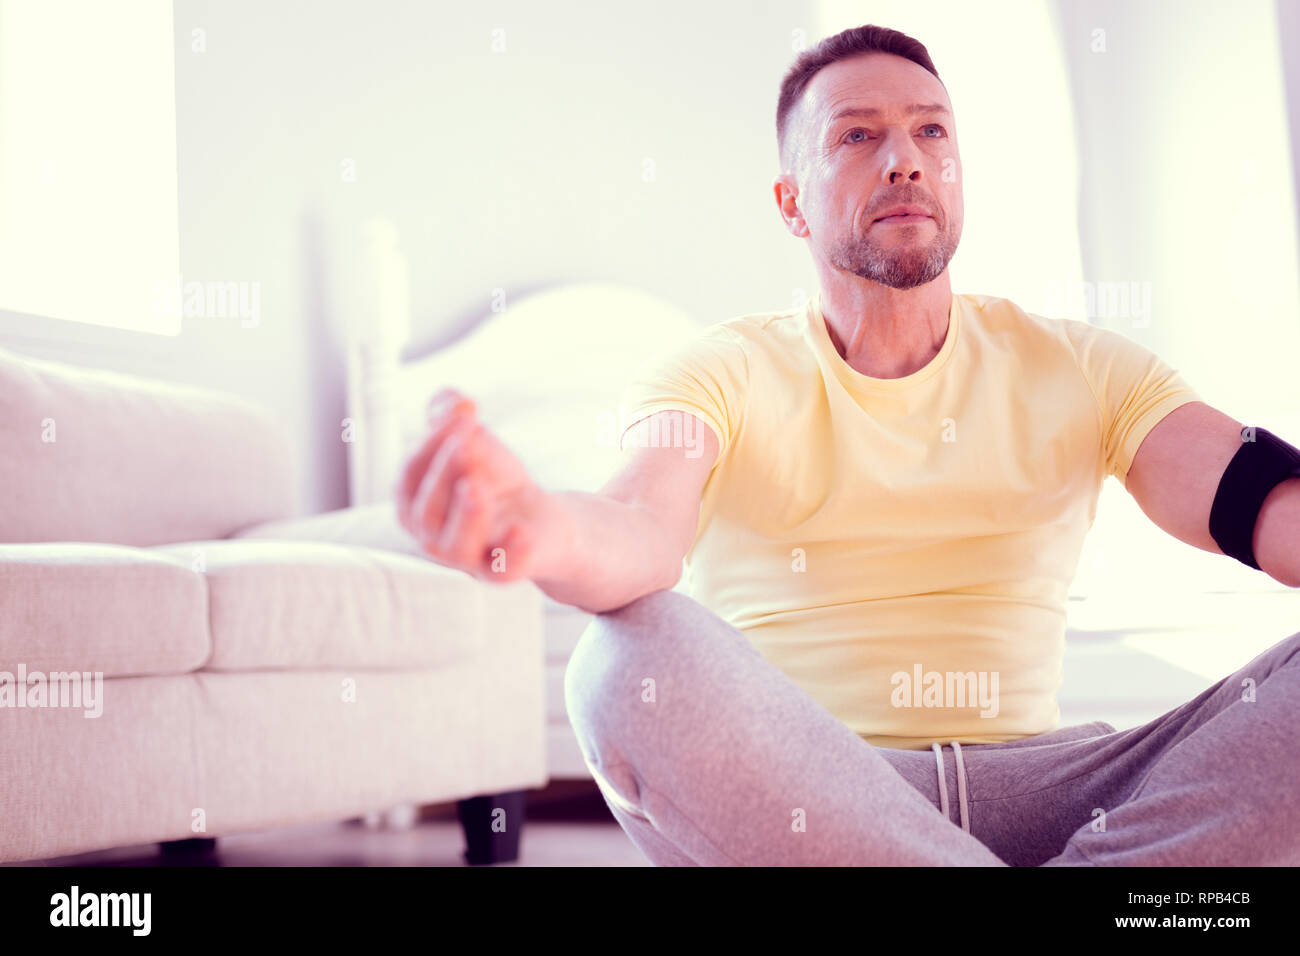 Man wearing grey trousers and yellow shirt sitting in lotus position meditating Stock Photo